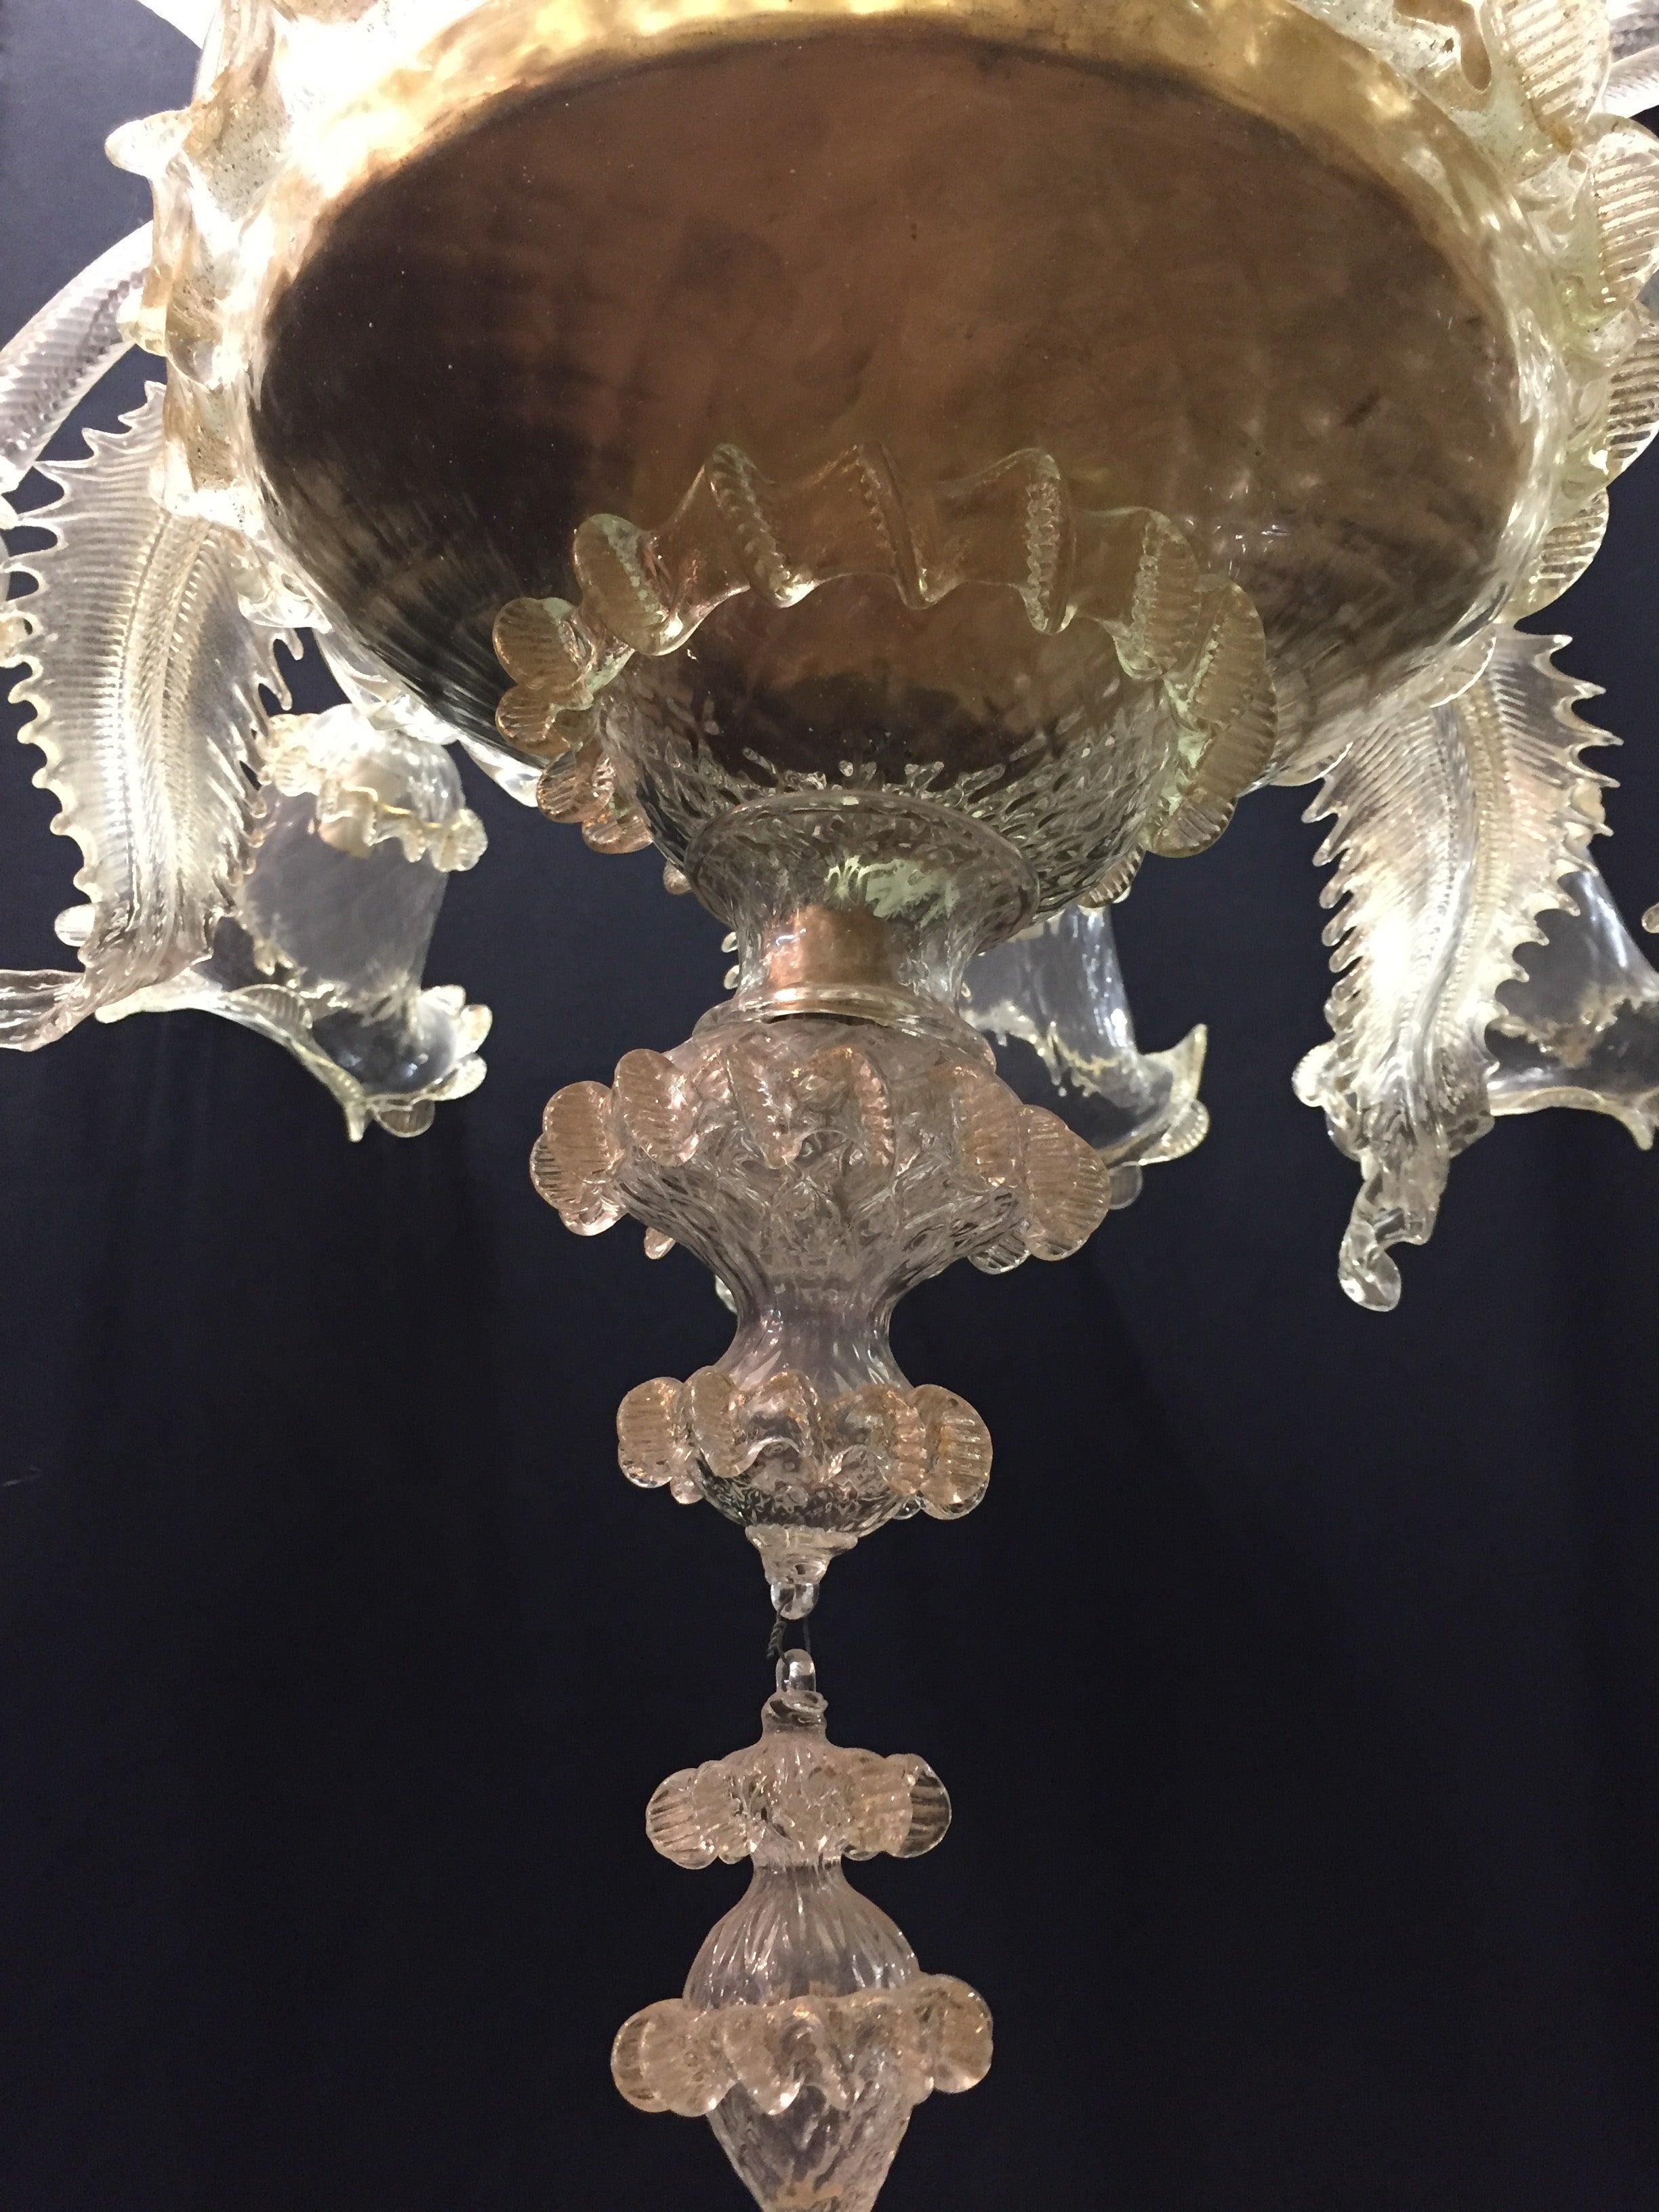 20th Century Monumental Murano Chandelier 12 Arms Made in Italy, Hand Blown and Handcrafted